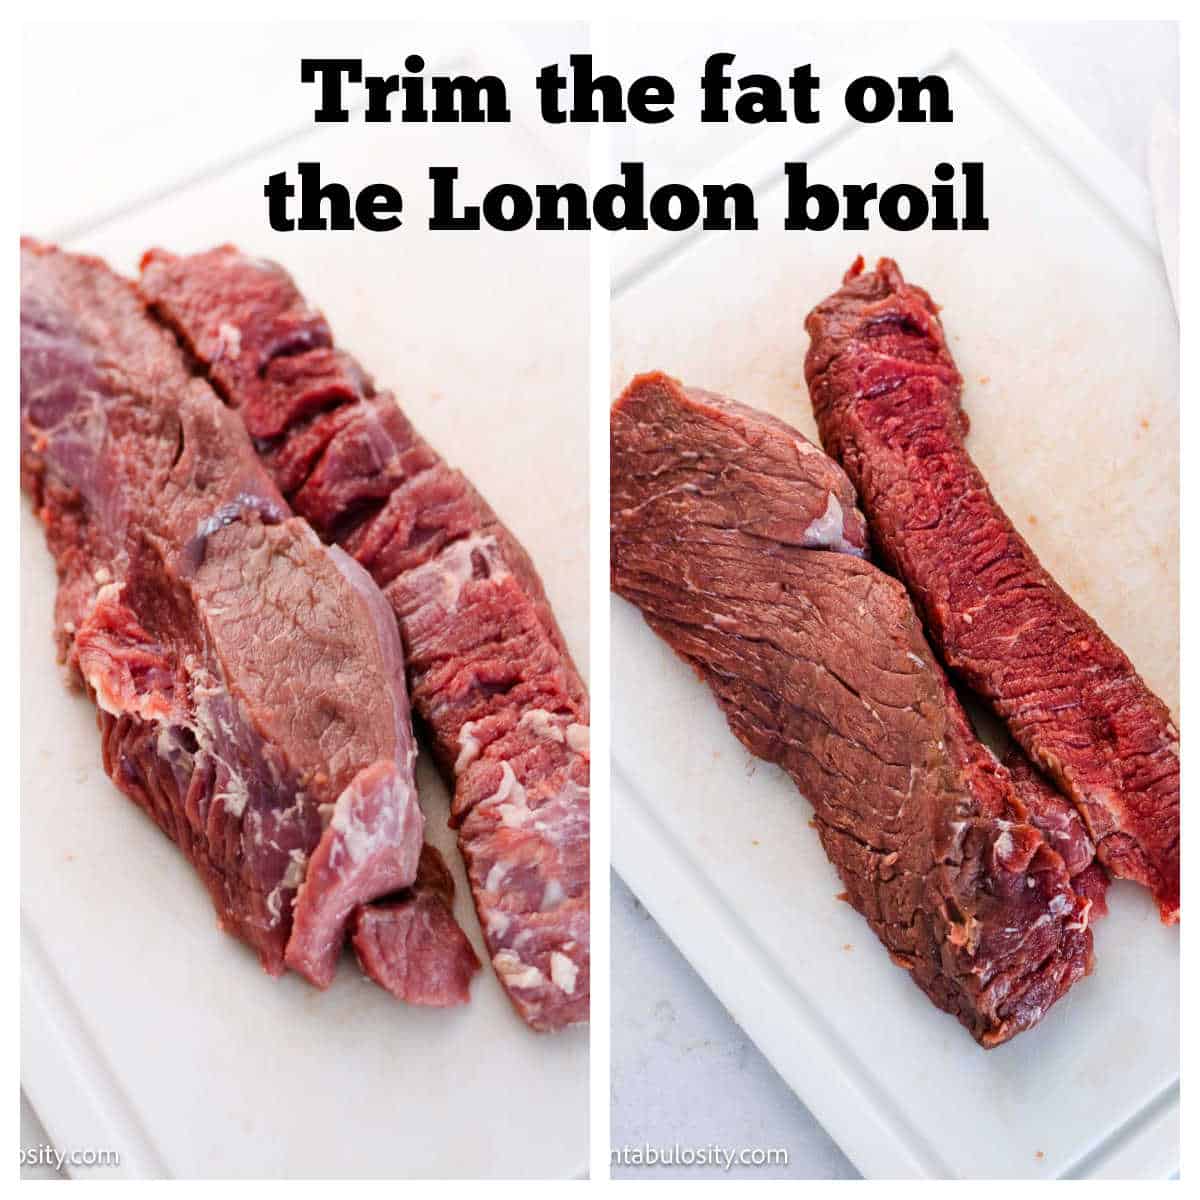 Two image collage showing London broil before trimming the fat off and after.